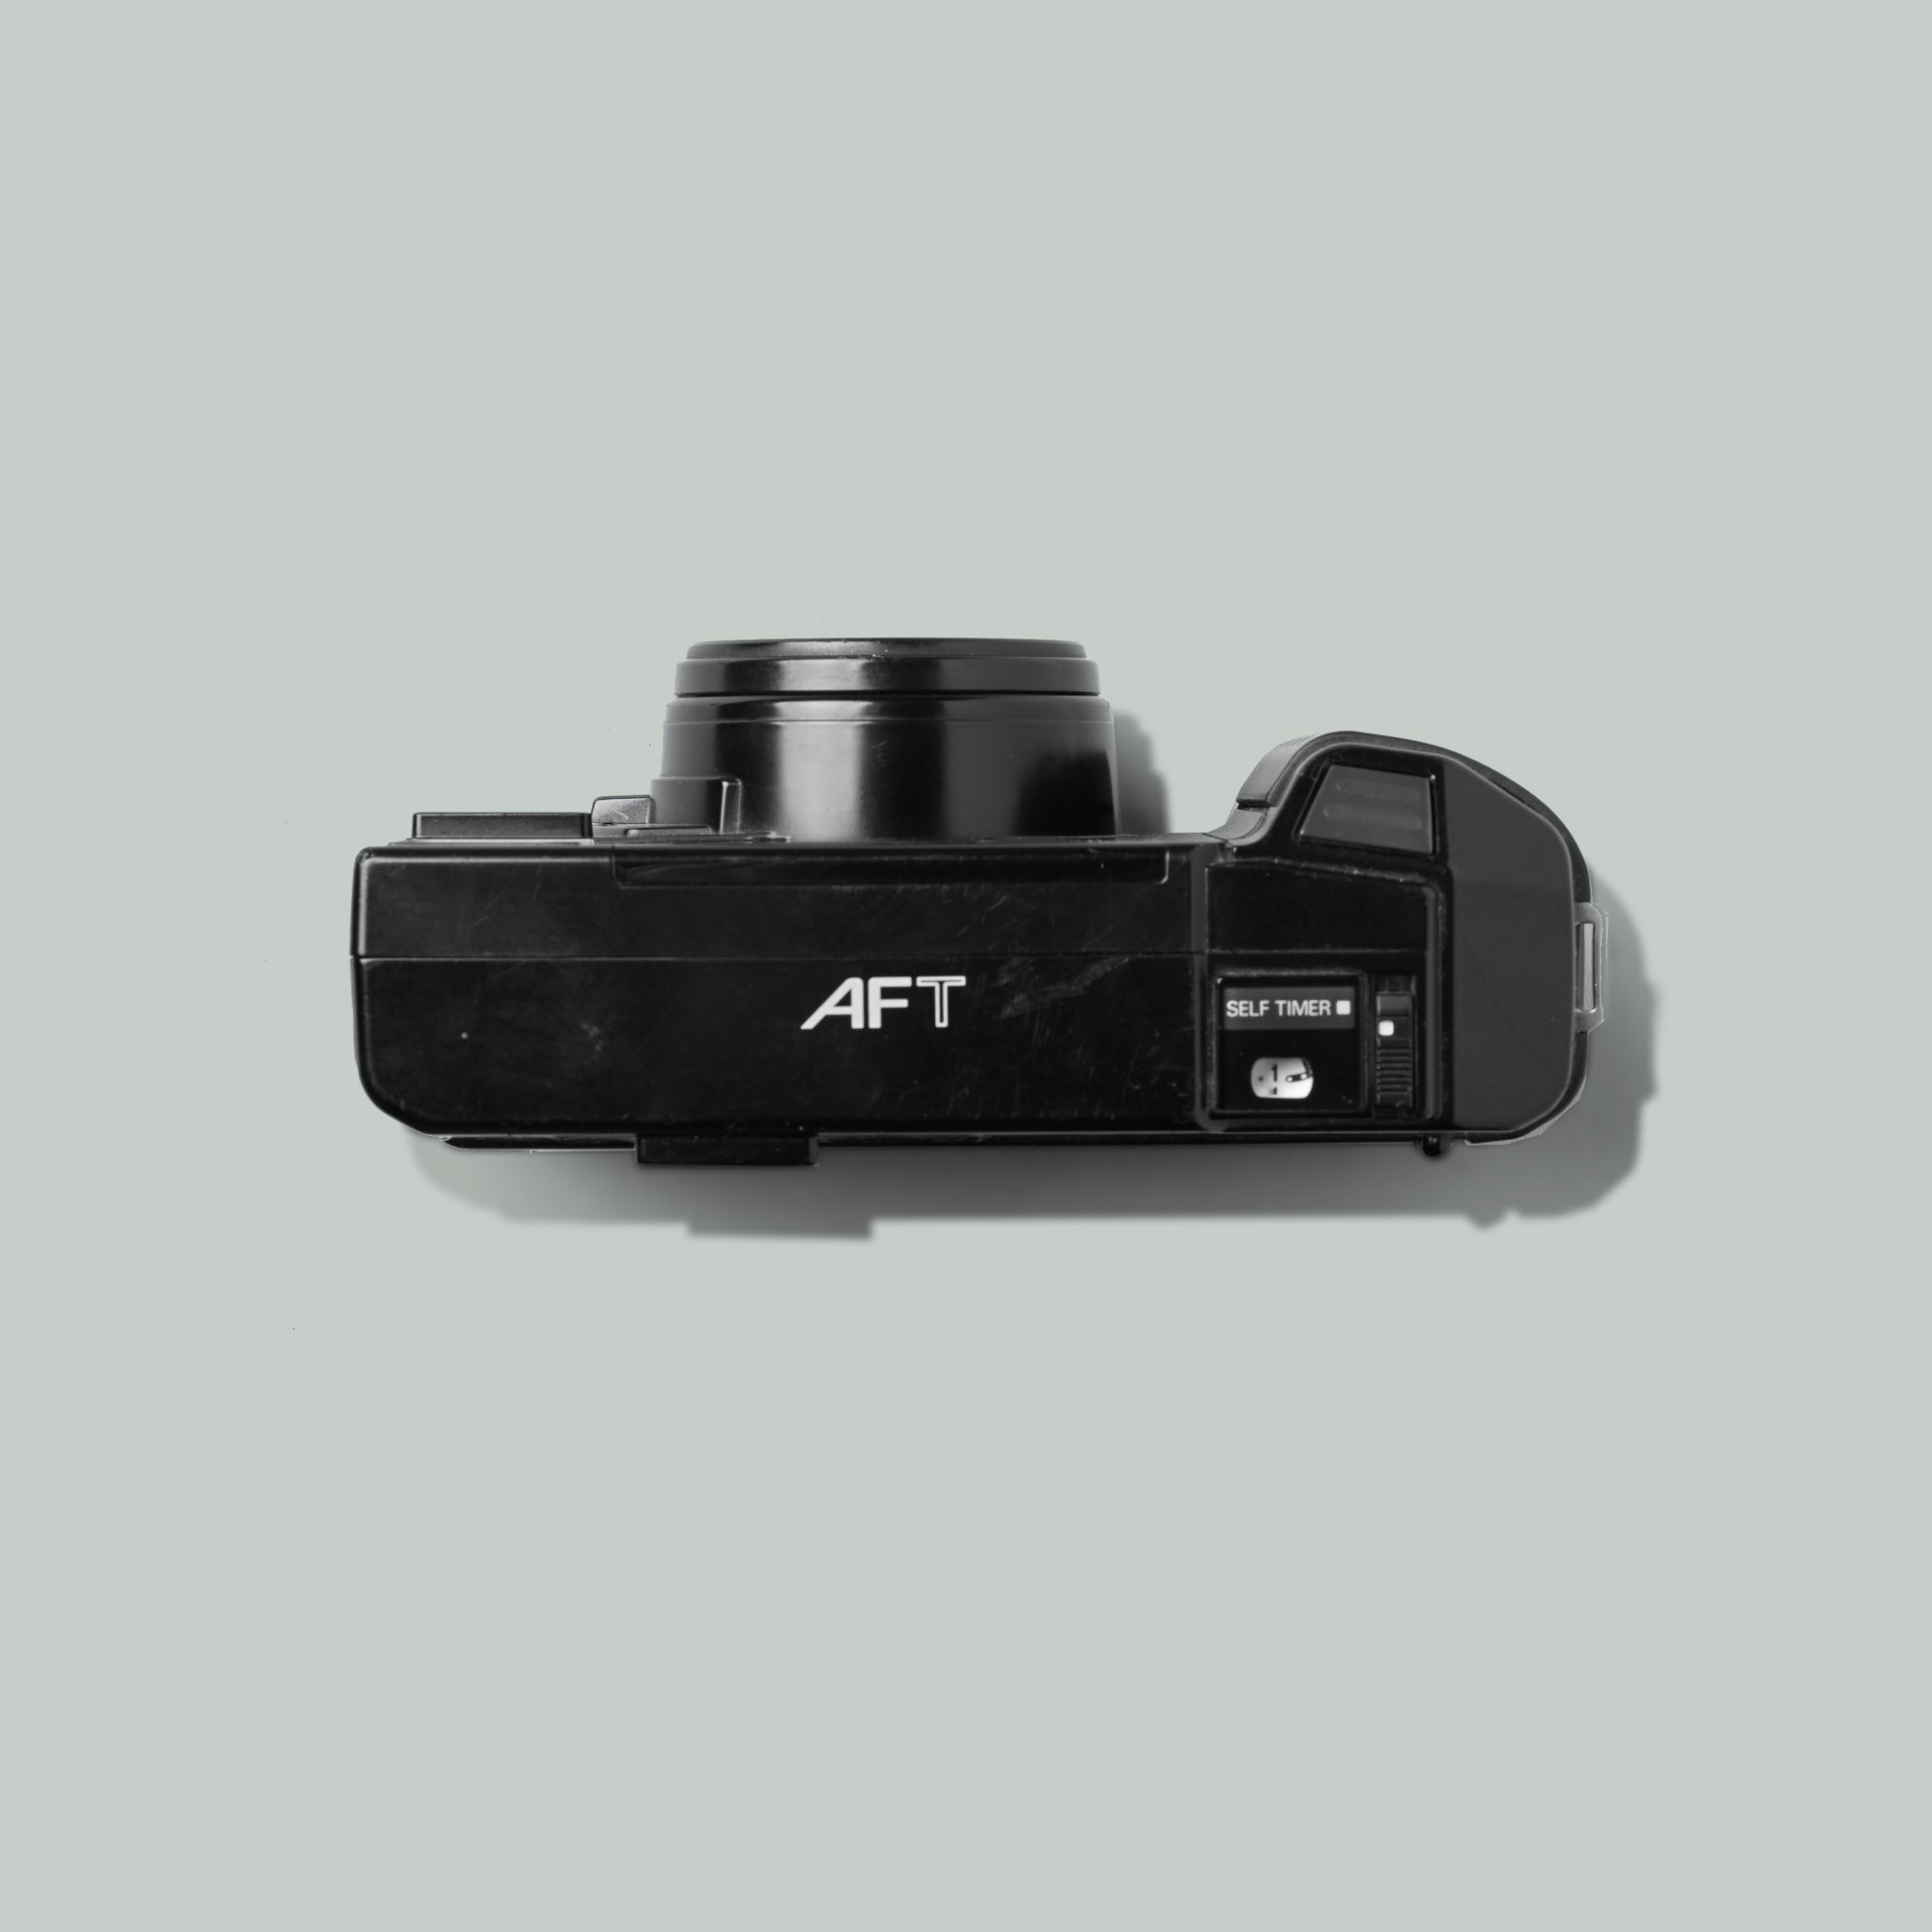 Buy Minolta AF-Tele now at Analogue Amsterdam